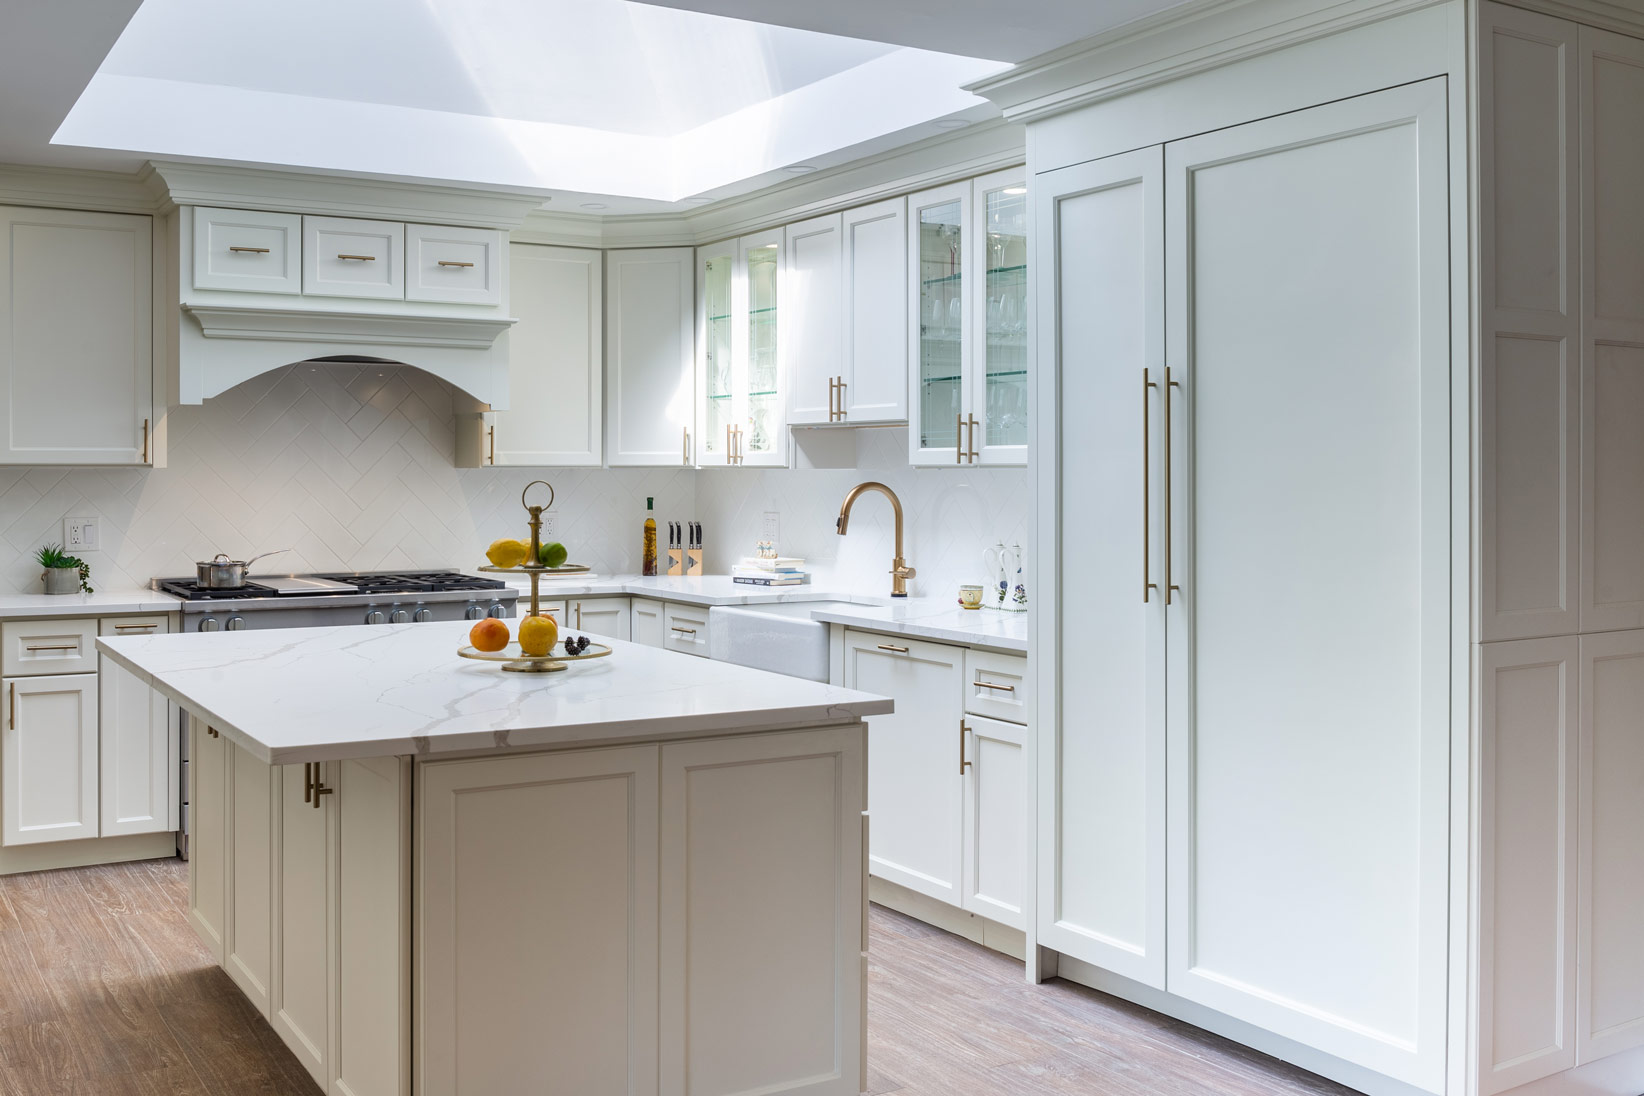 Shaker white kitchen style with base and wall cabinets